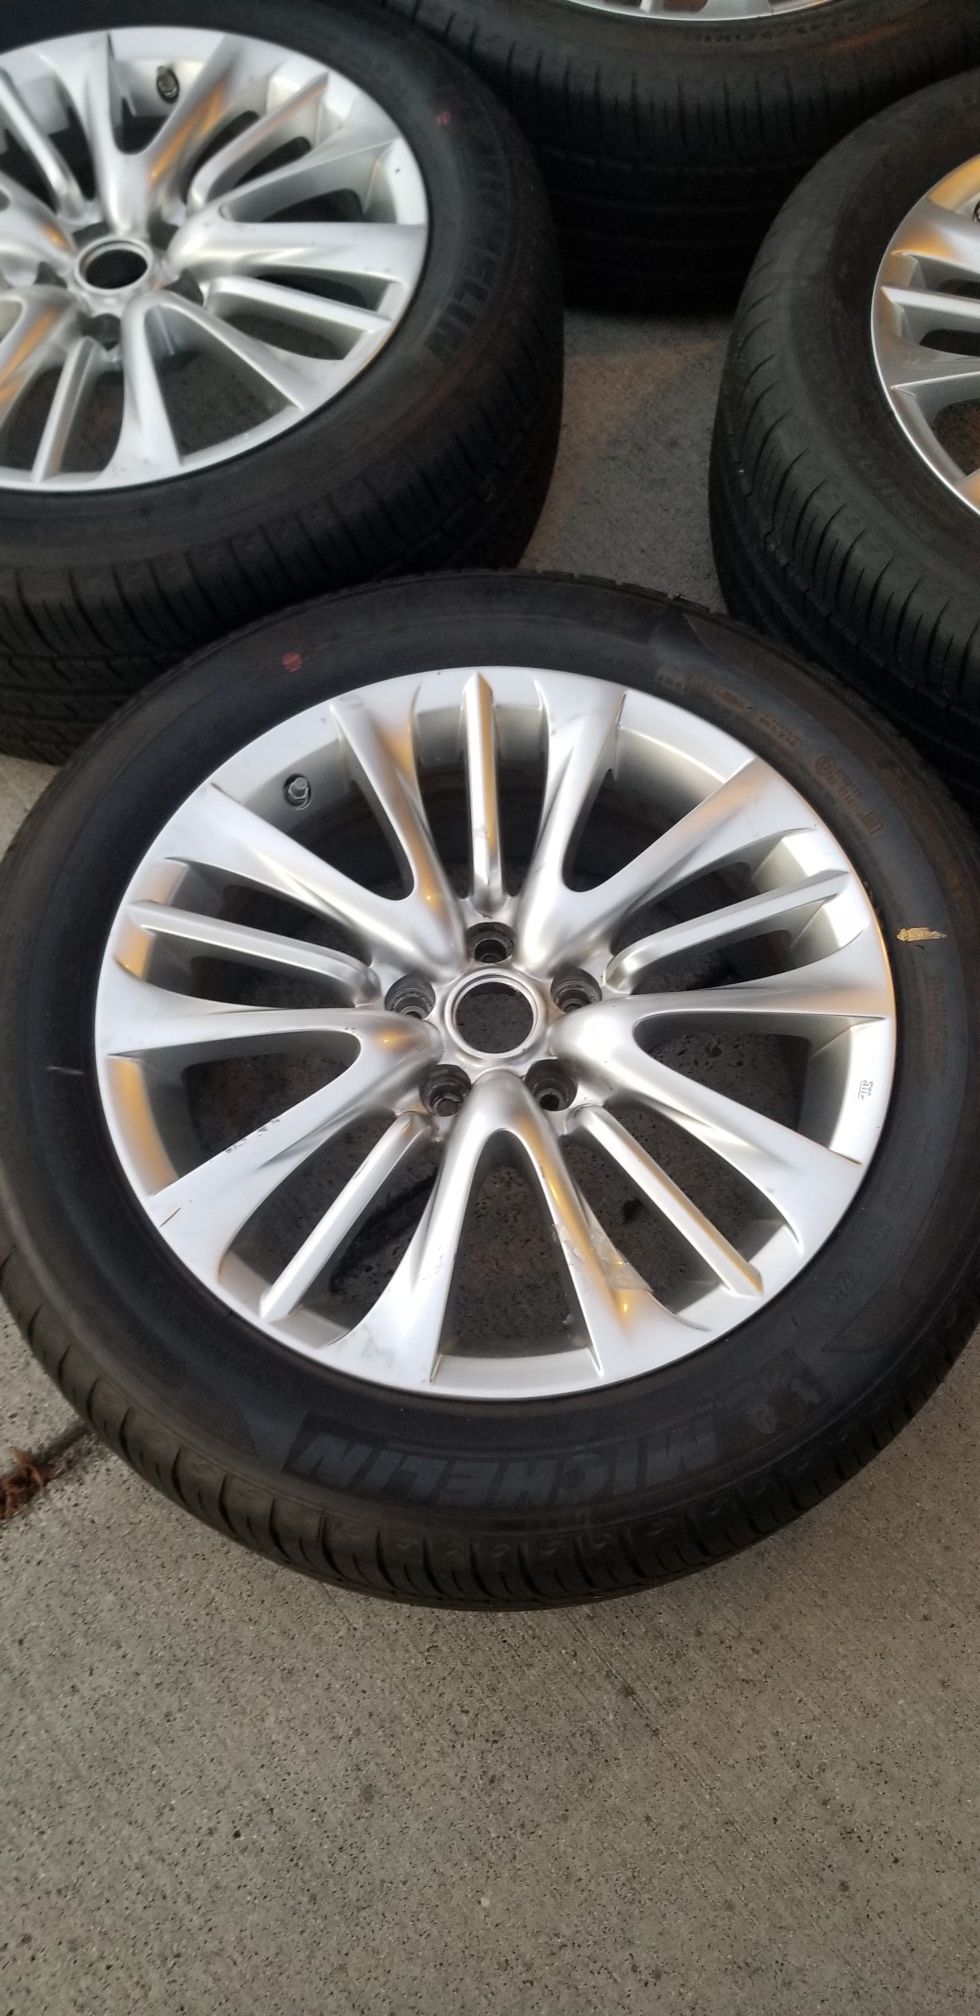 Selling 4 wheels that are in excellent condition and with tires that still have alot of tread left. The tires are 245/50/18 Michelin